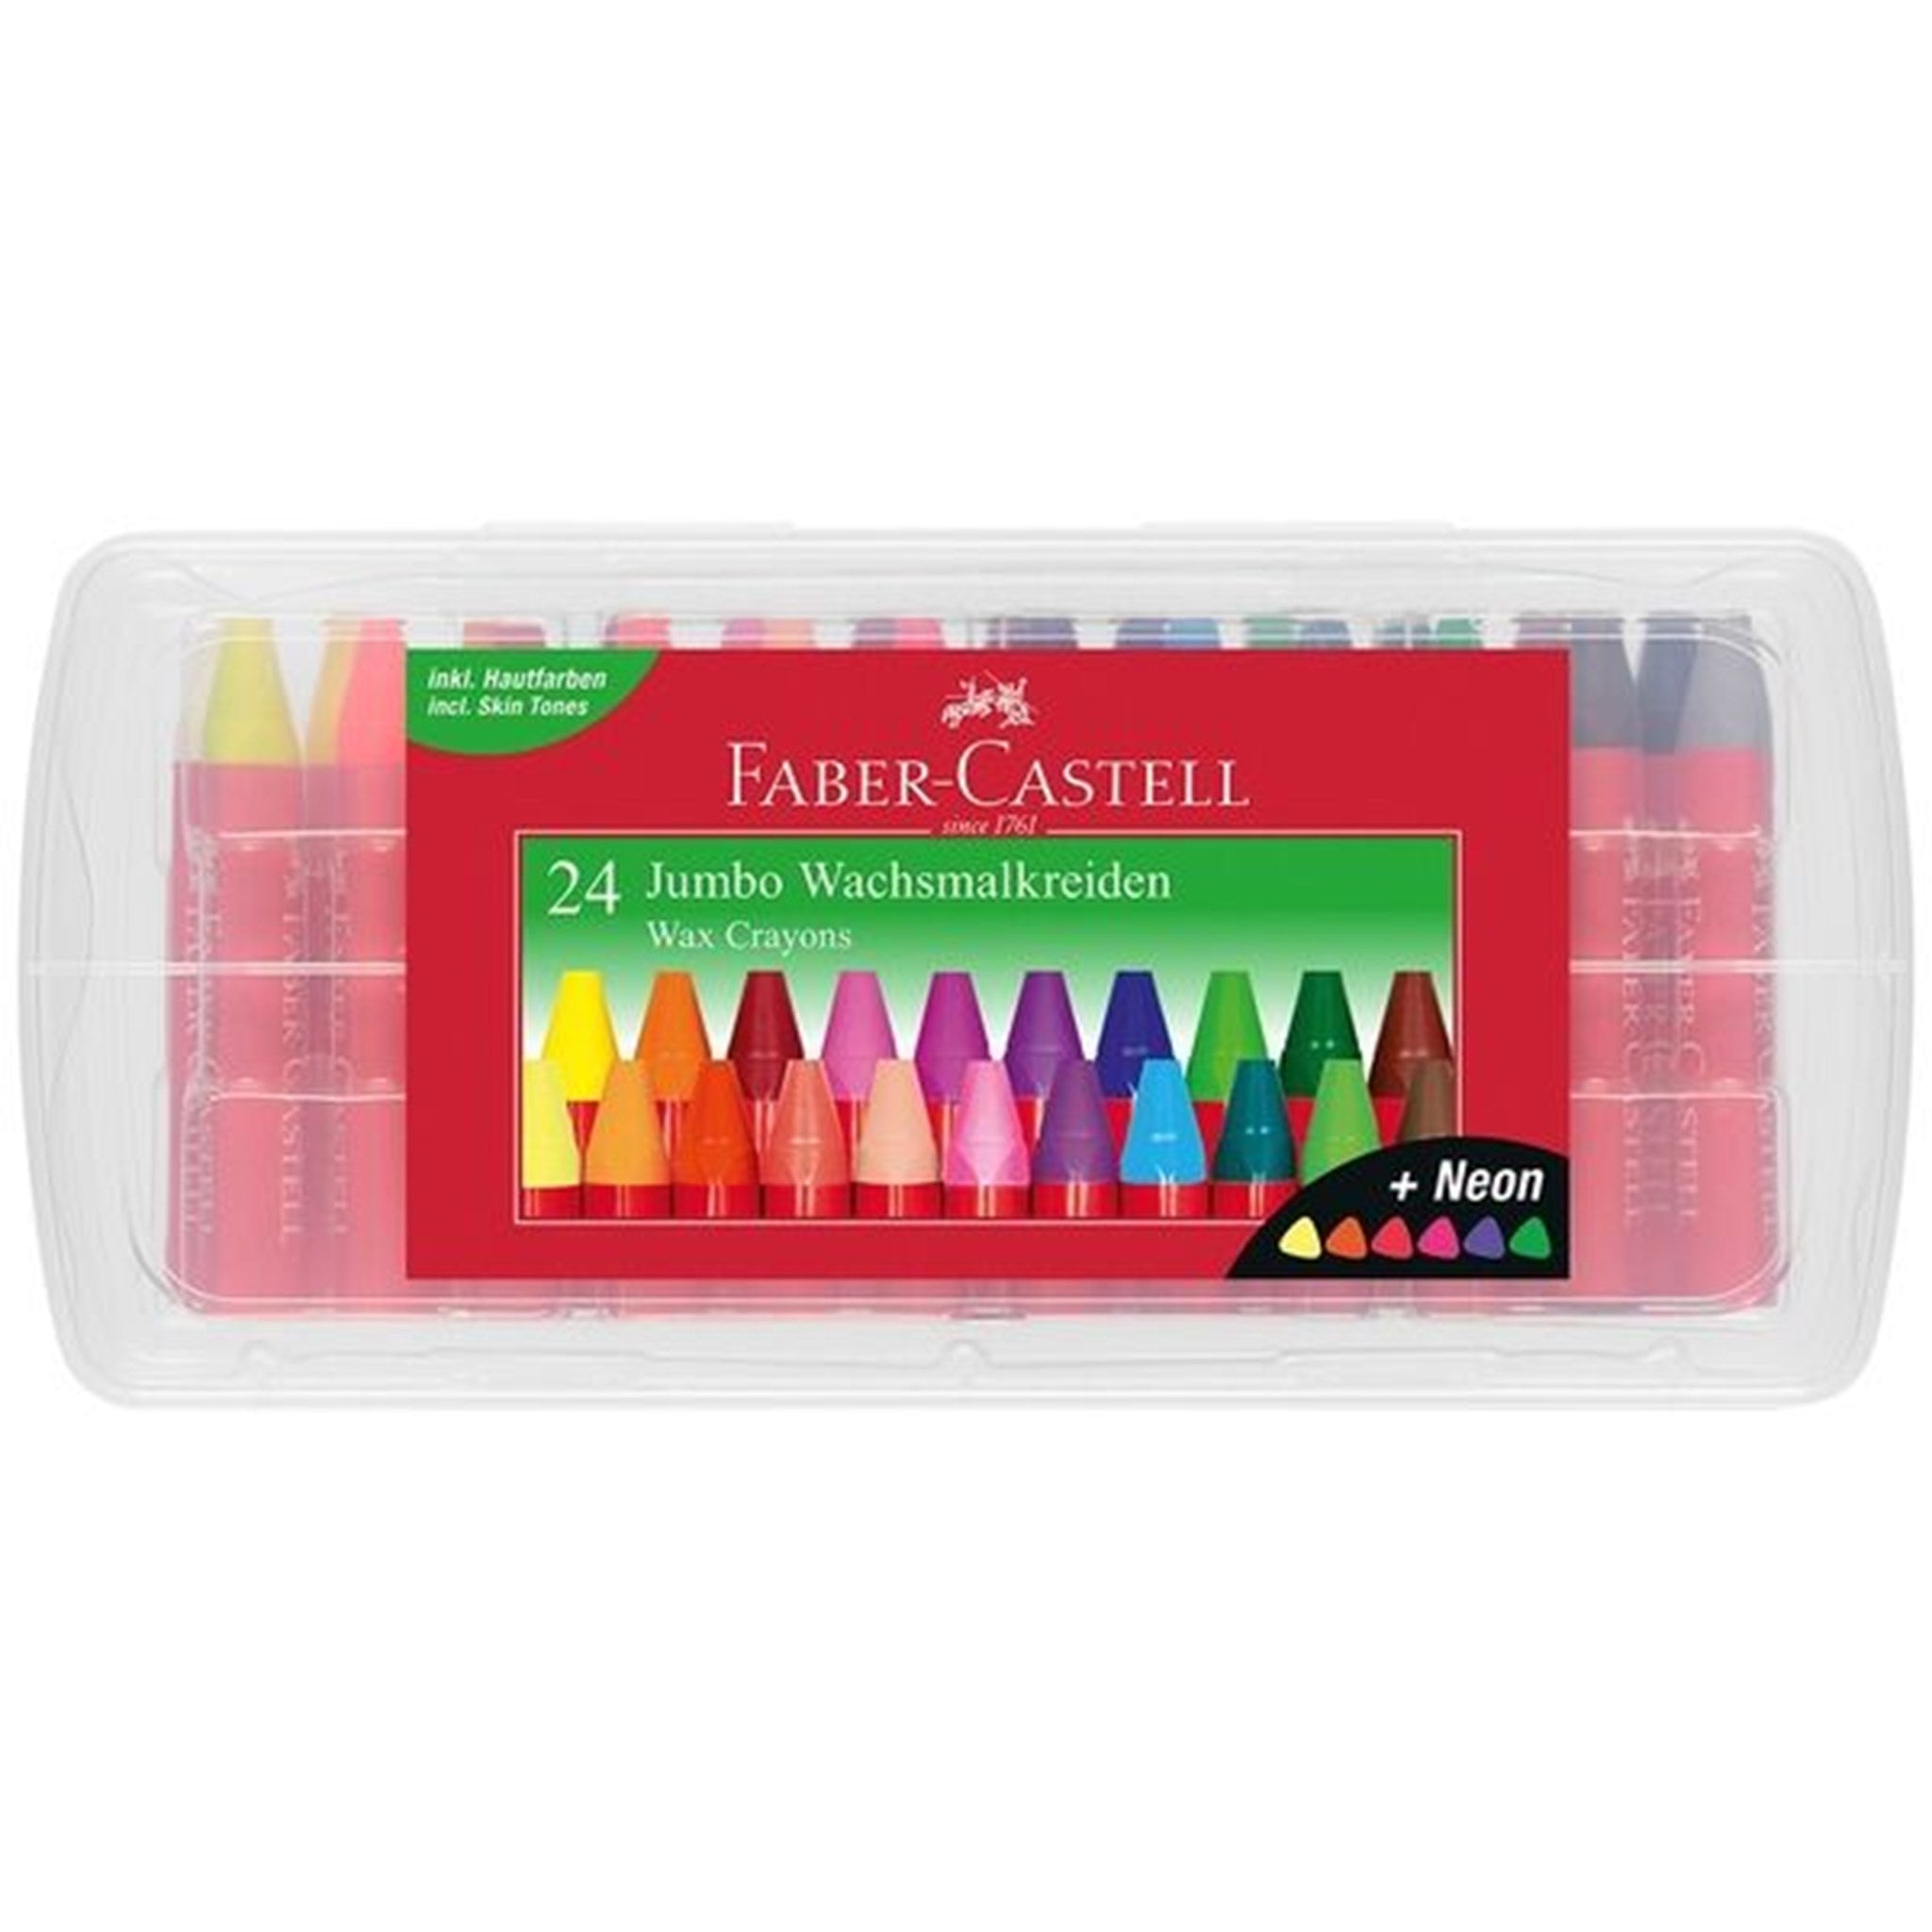 Faber Castell Jumbo Wax Crayons Box 24 Farver